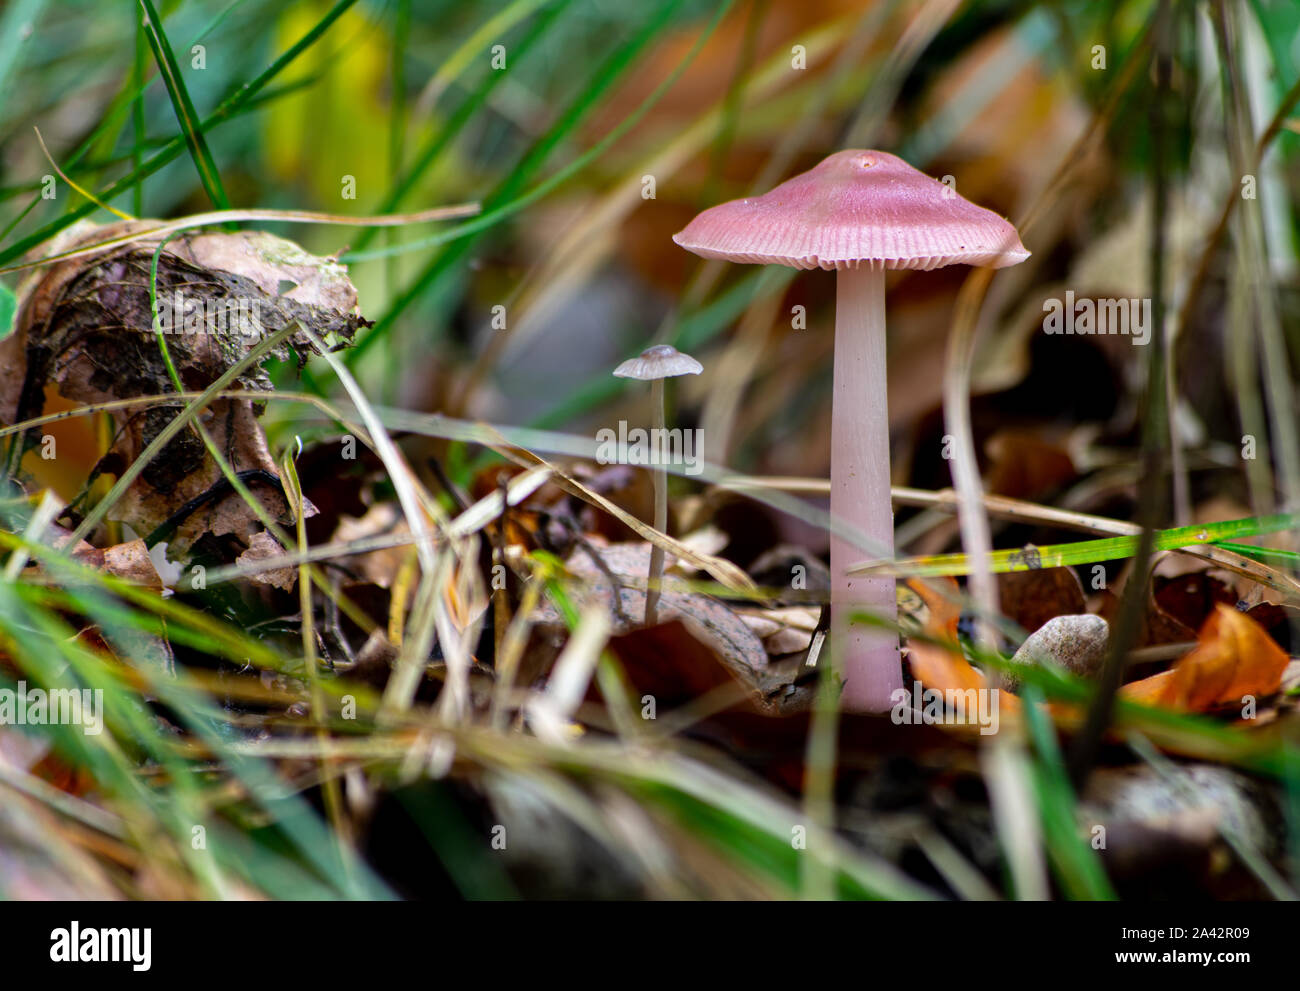 Mycena rosea, commonly known as the rosy bonnet mushroom growing on the forest floor in Germany / Europe in October Stock Photo